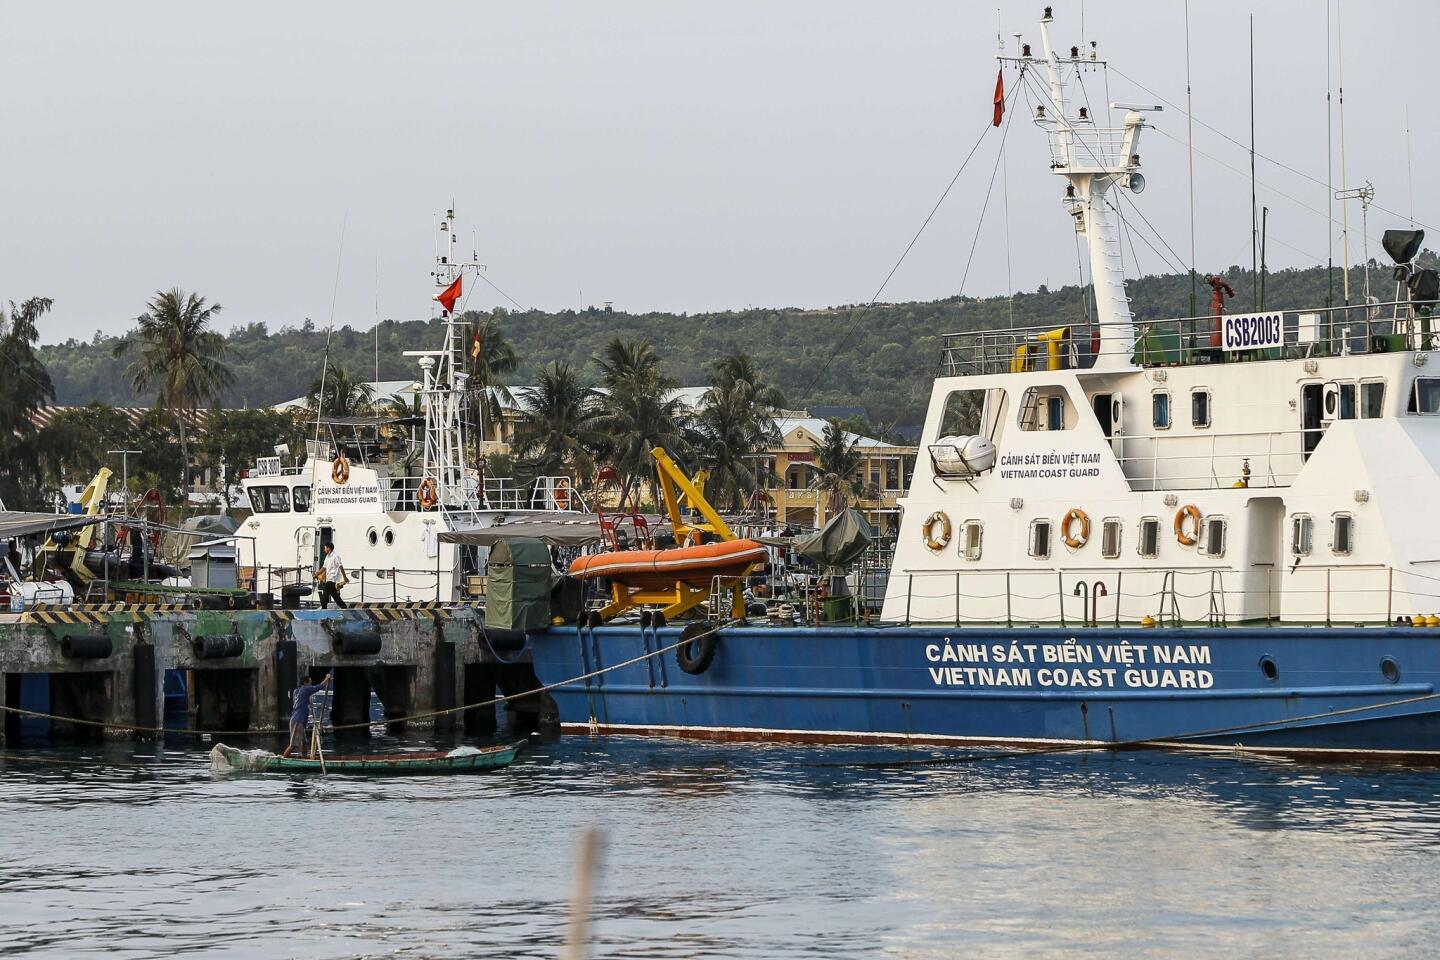 A Vietnam coast guard ship is seen anchored at a local naval base at Phu Quoc island, in the waters of southern Vietnam, where a Malaysian Airlines jet was presumed lost.